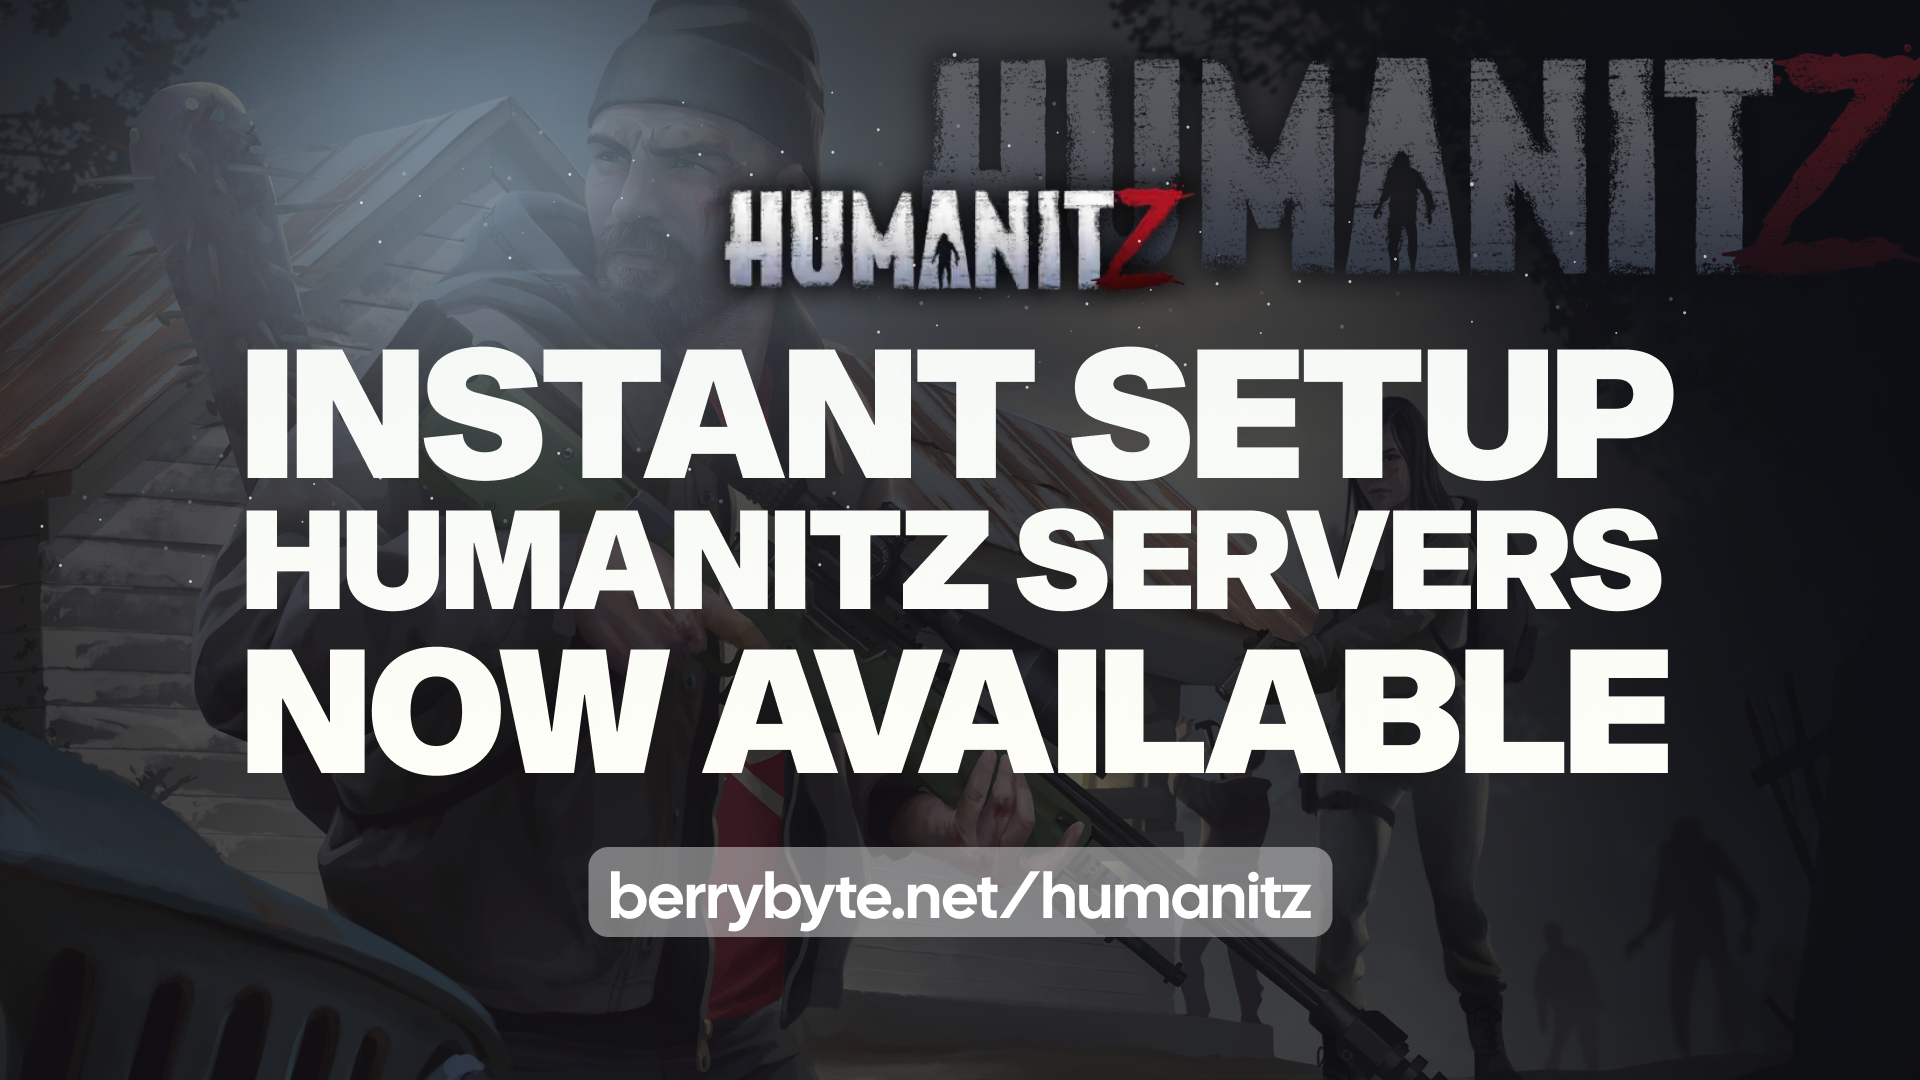 Create your own multiplayer game server for Humanitz instantly within minutes.